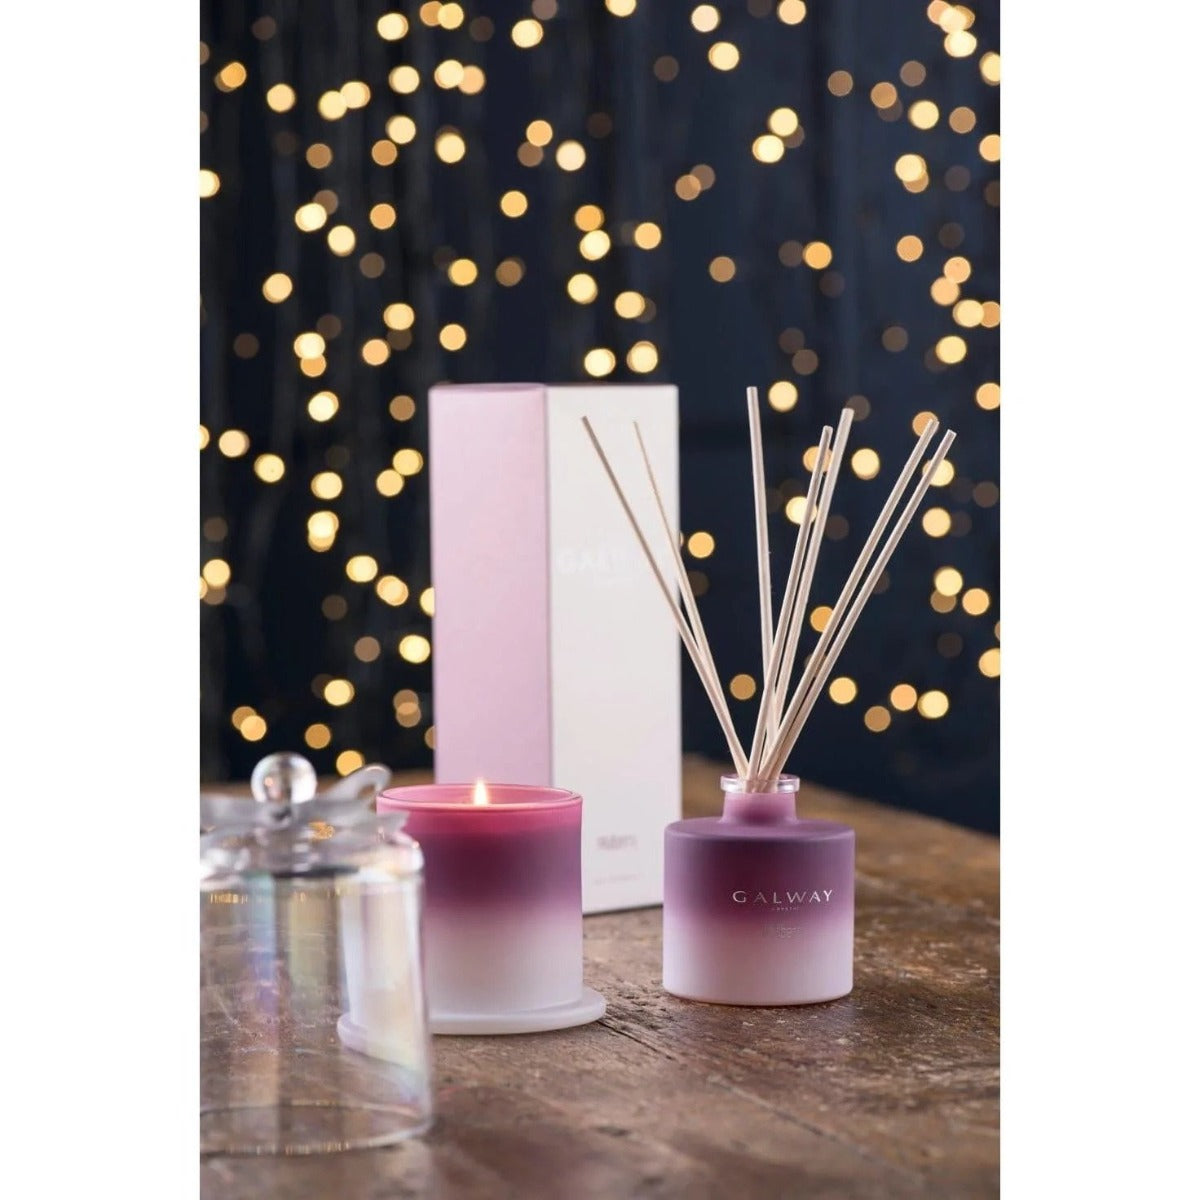 Galway Crystal | Mulberry Diffuser